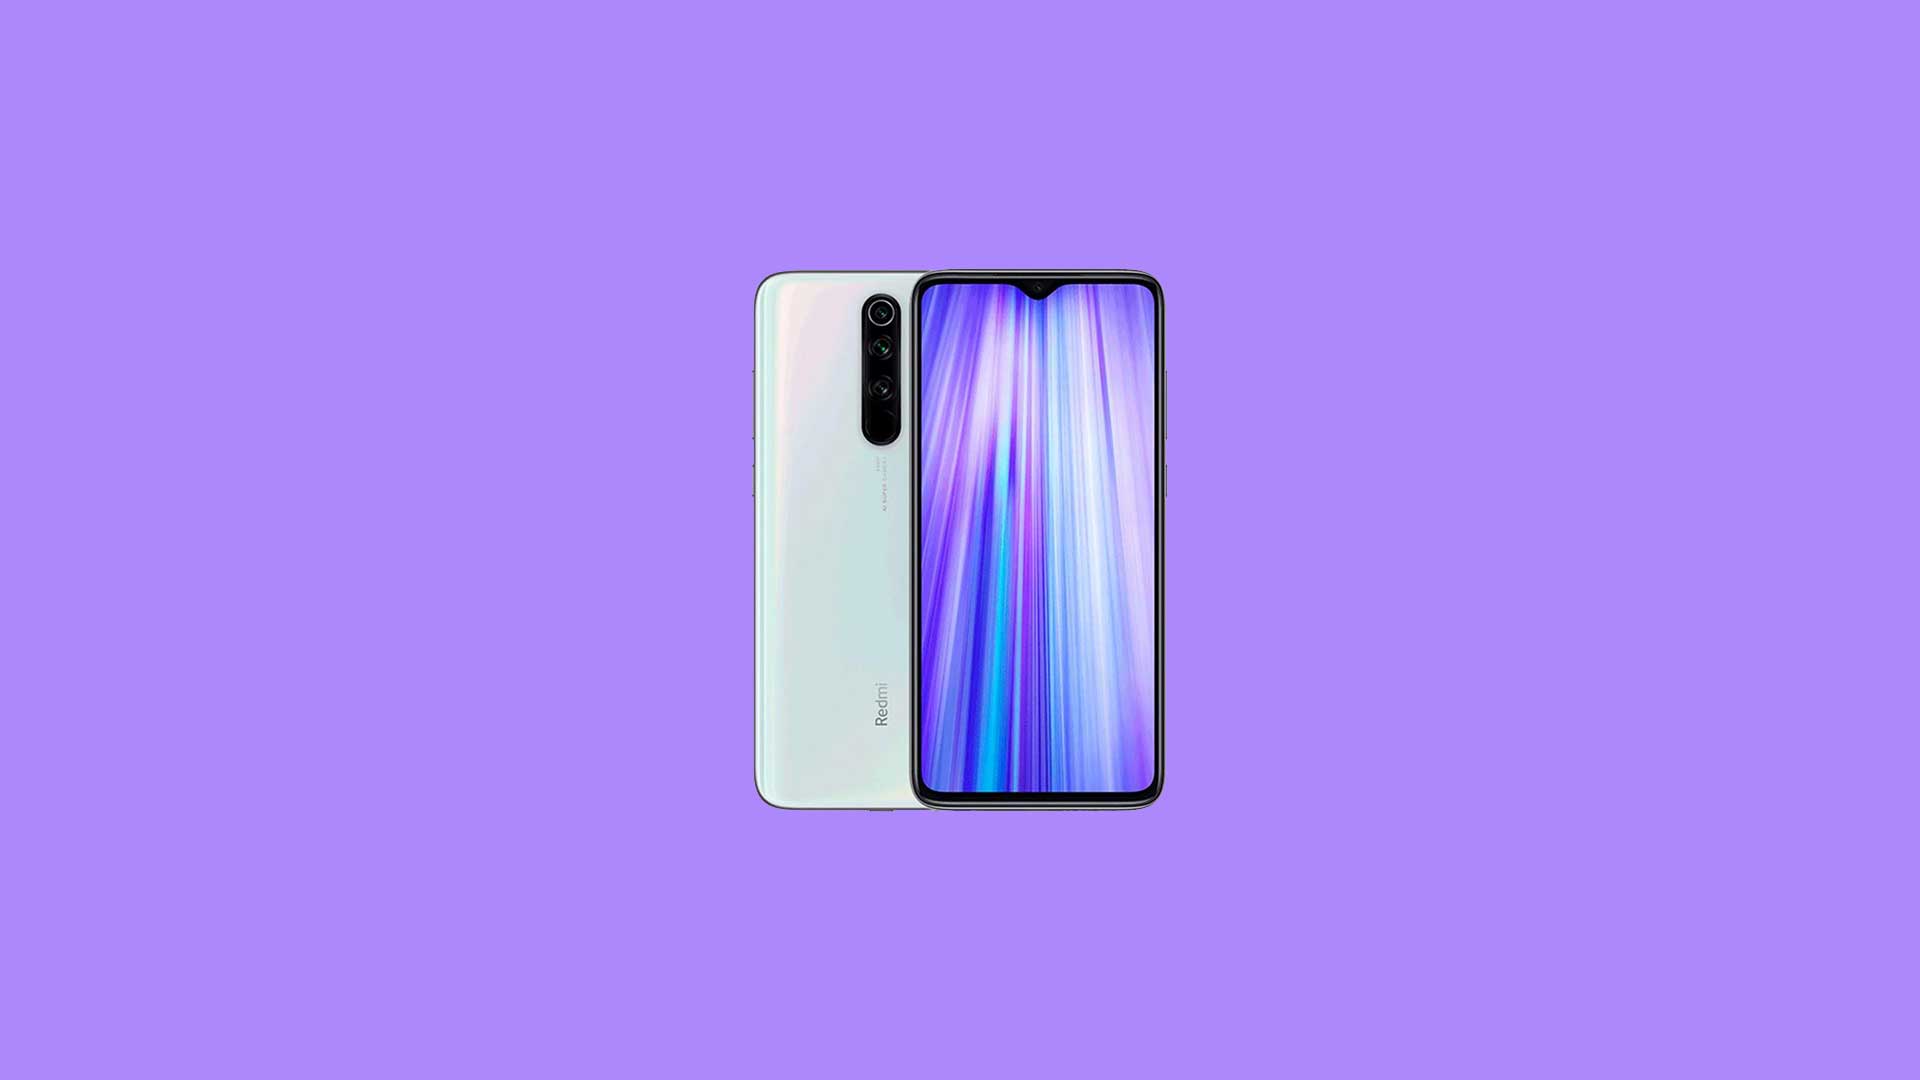 Download MIUI 11.0.3.0 Europe Stable ROM for Redmi Note 8 Pro [V11.0.3.0.PGGEUXM]